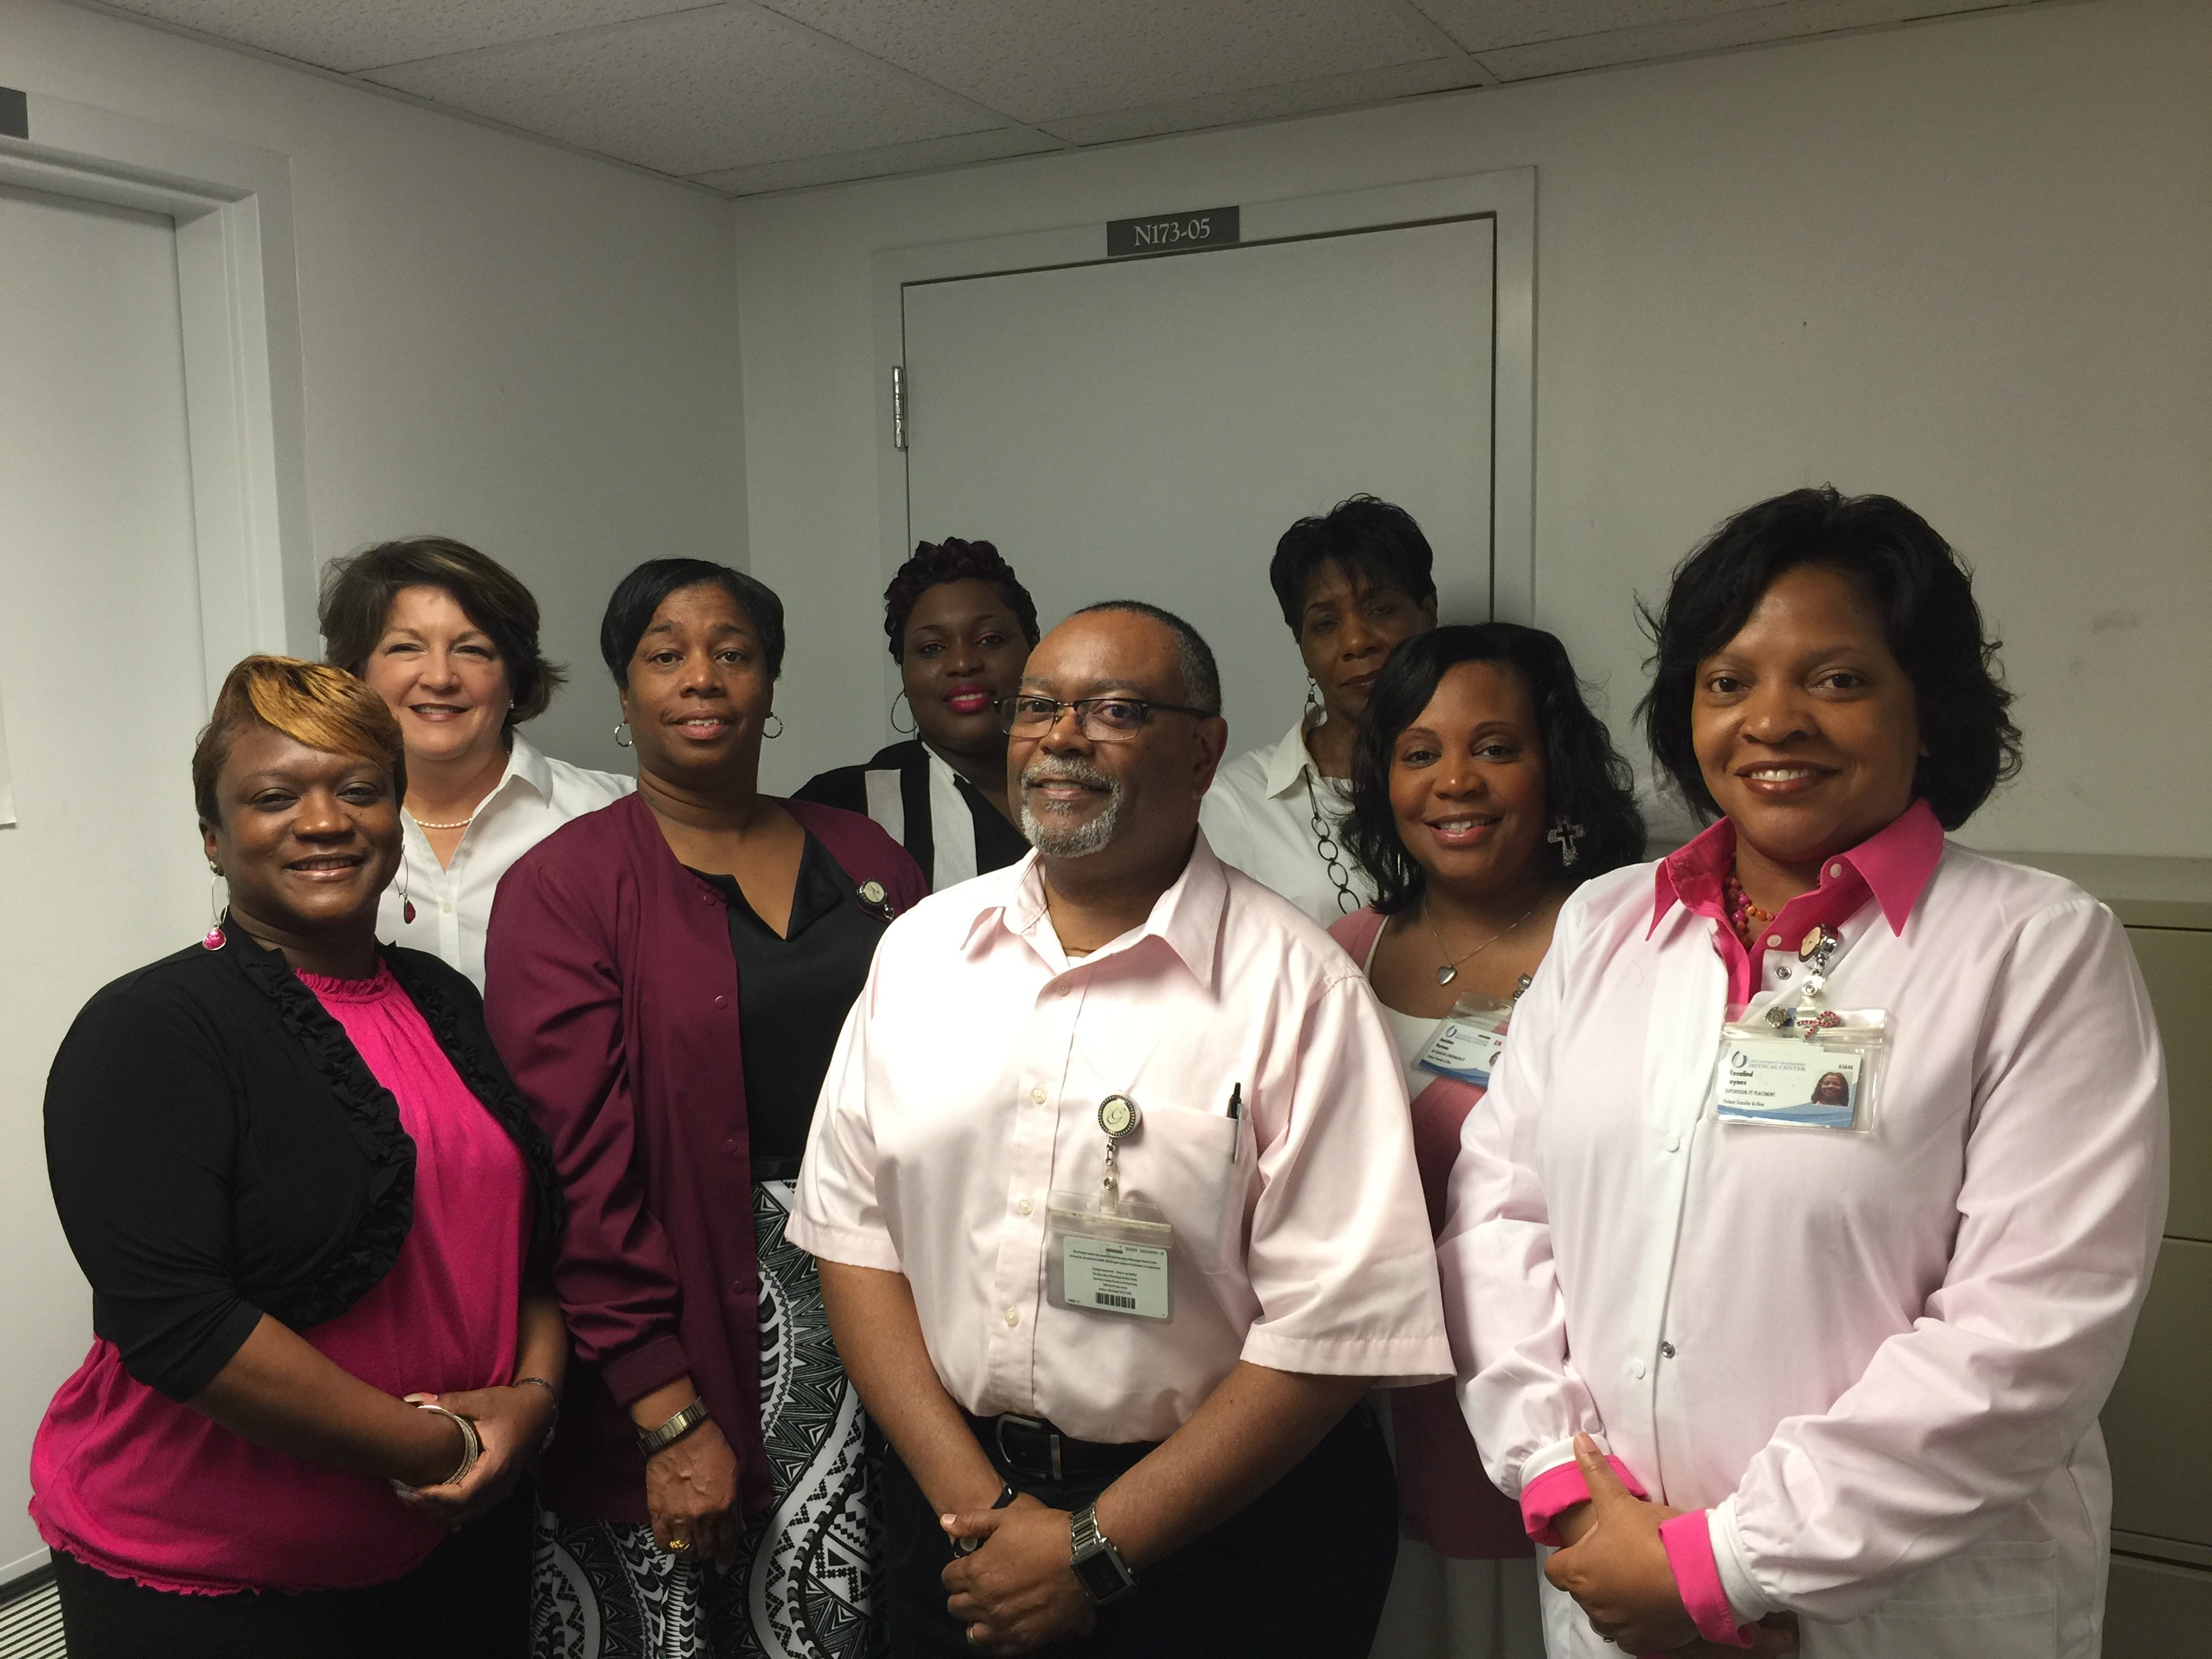 Some Patient Placement Center staff include, from left, Sonji Wilborn, Tammy Barnes, Hurene Smith, Tara Bell, Noah Godfrey, Lillie Carson, Amishau Harmon and Rosalind Jaynes.